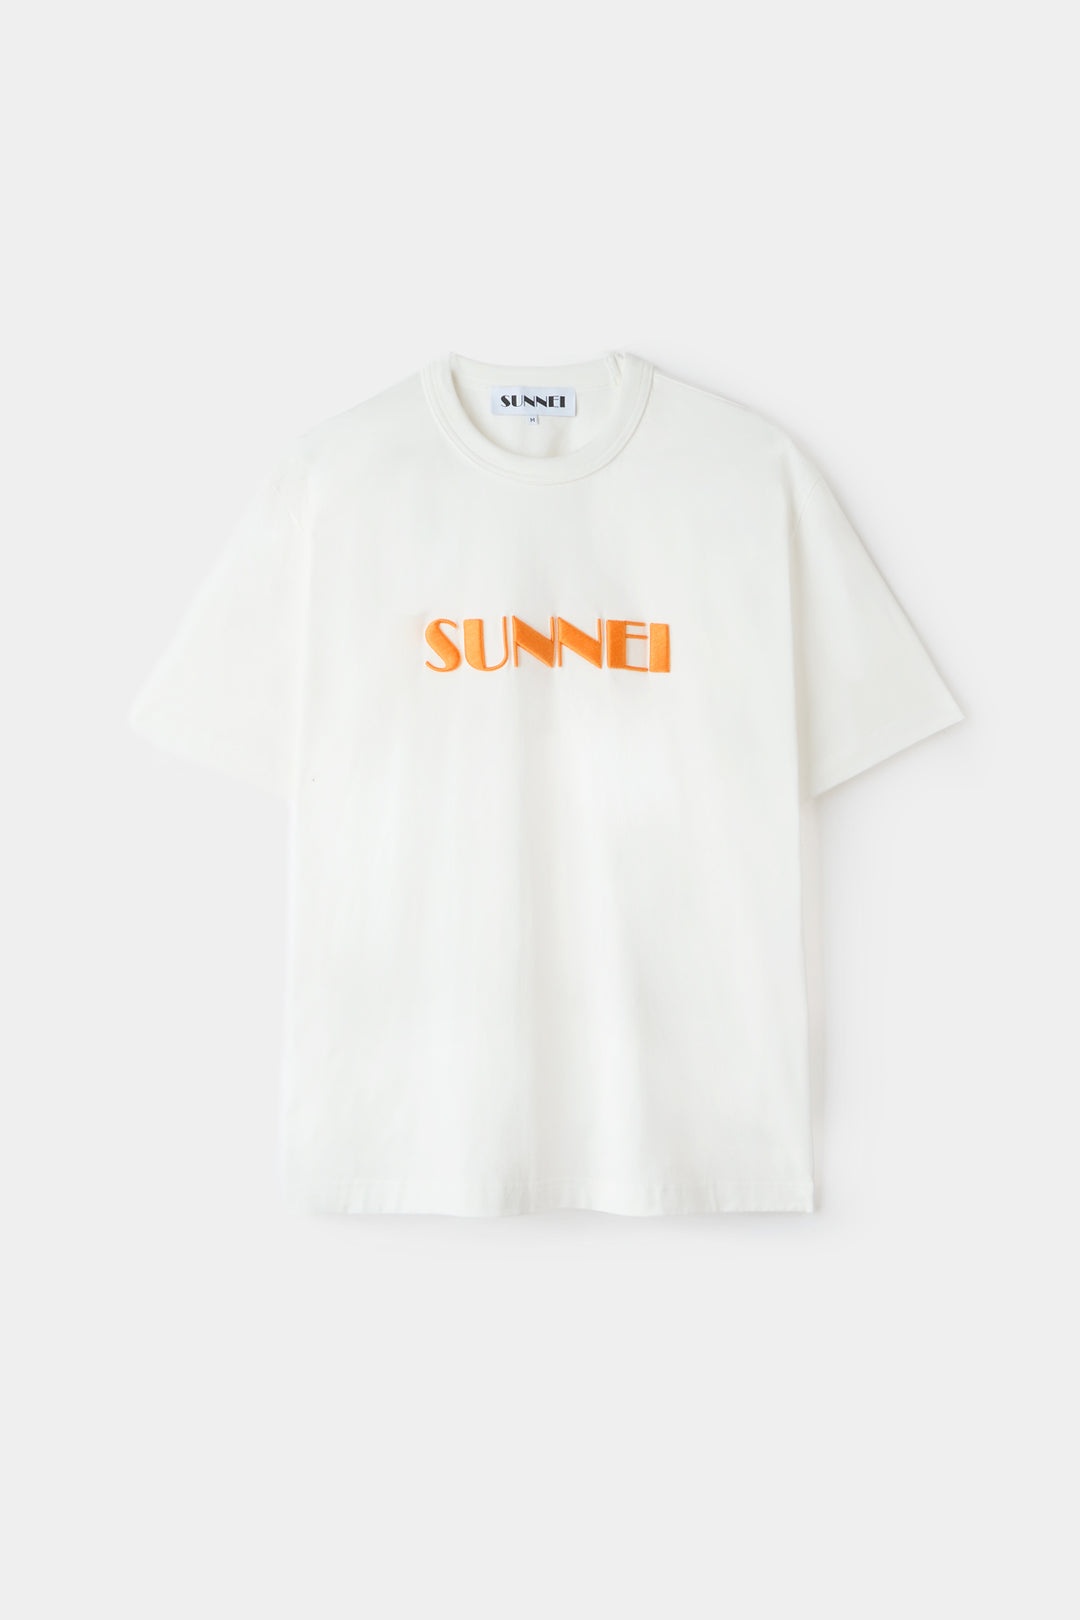 EMBROIDERED BIG LOGO T-SHIRT / off-white & peach - 1